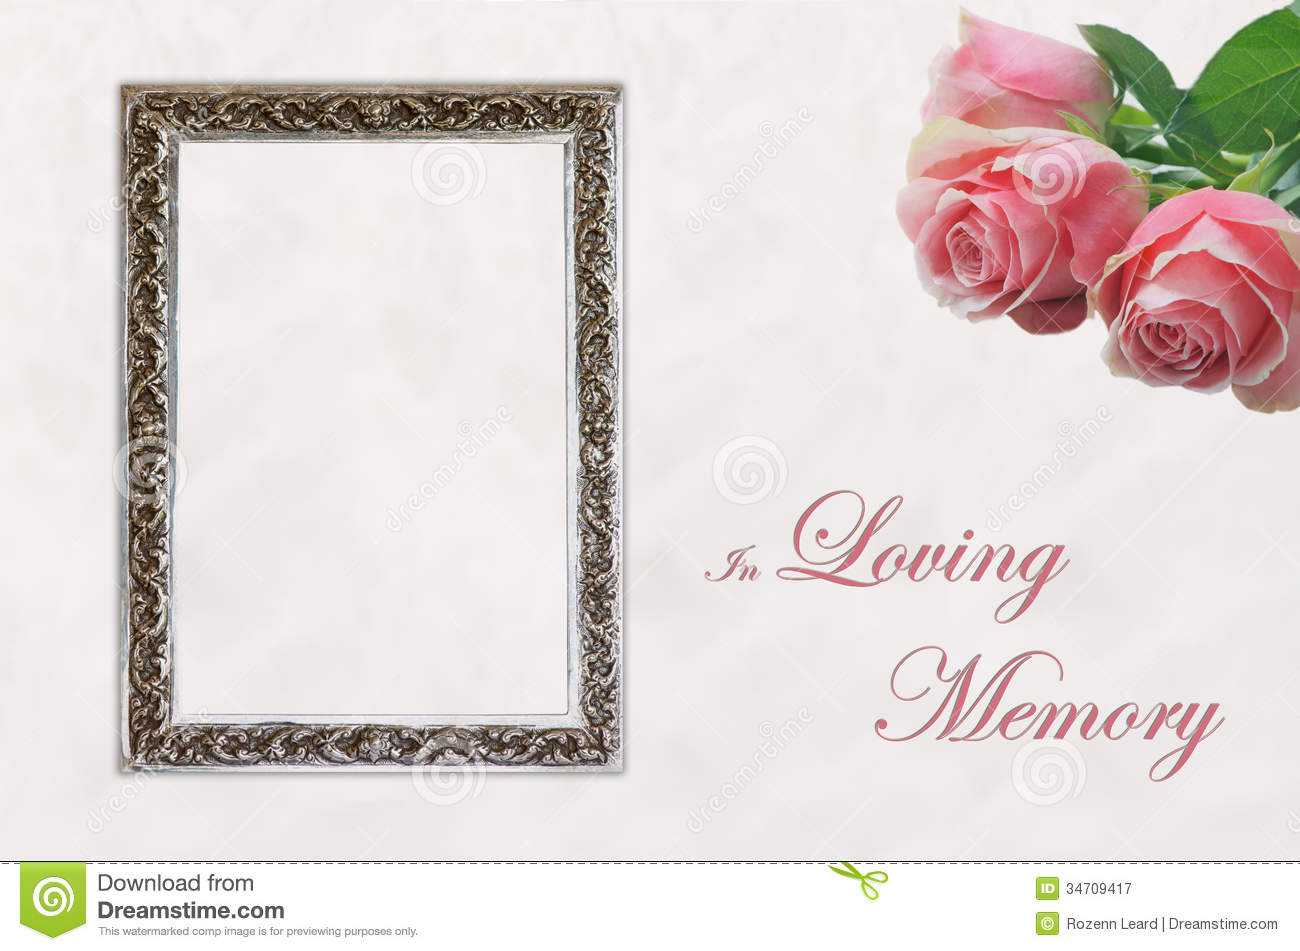 In Memory Cards Templates ] – Memory Template 4 Celebration For In Memory Cards Templates